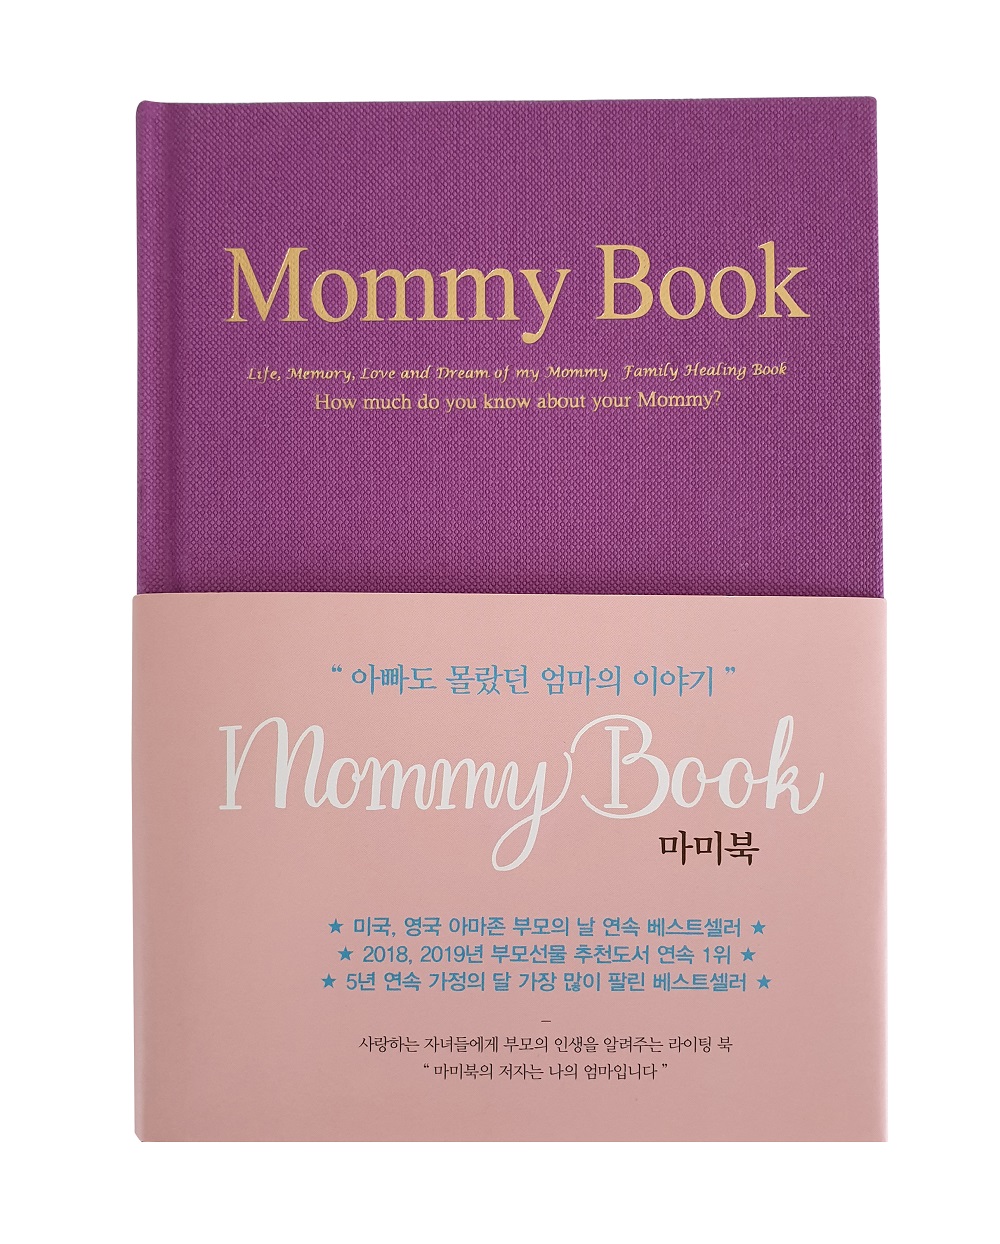   Mommy Book 